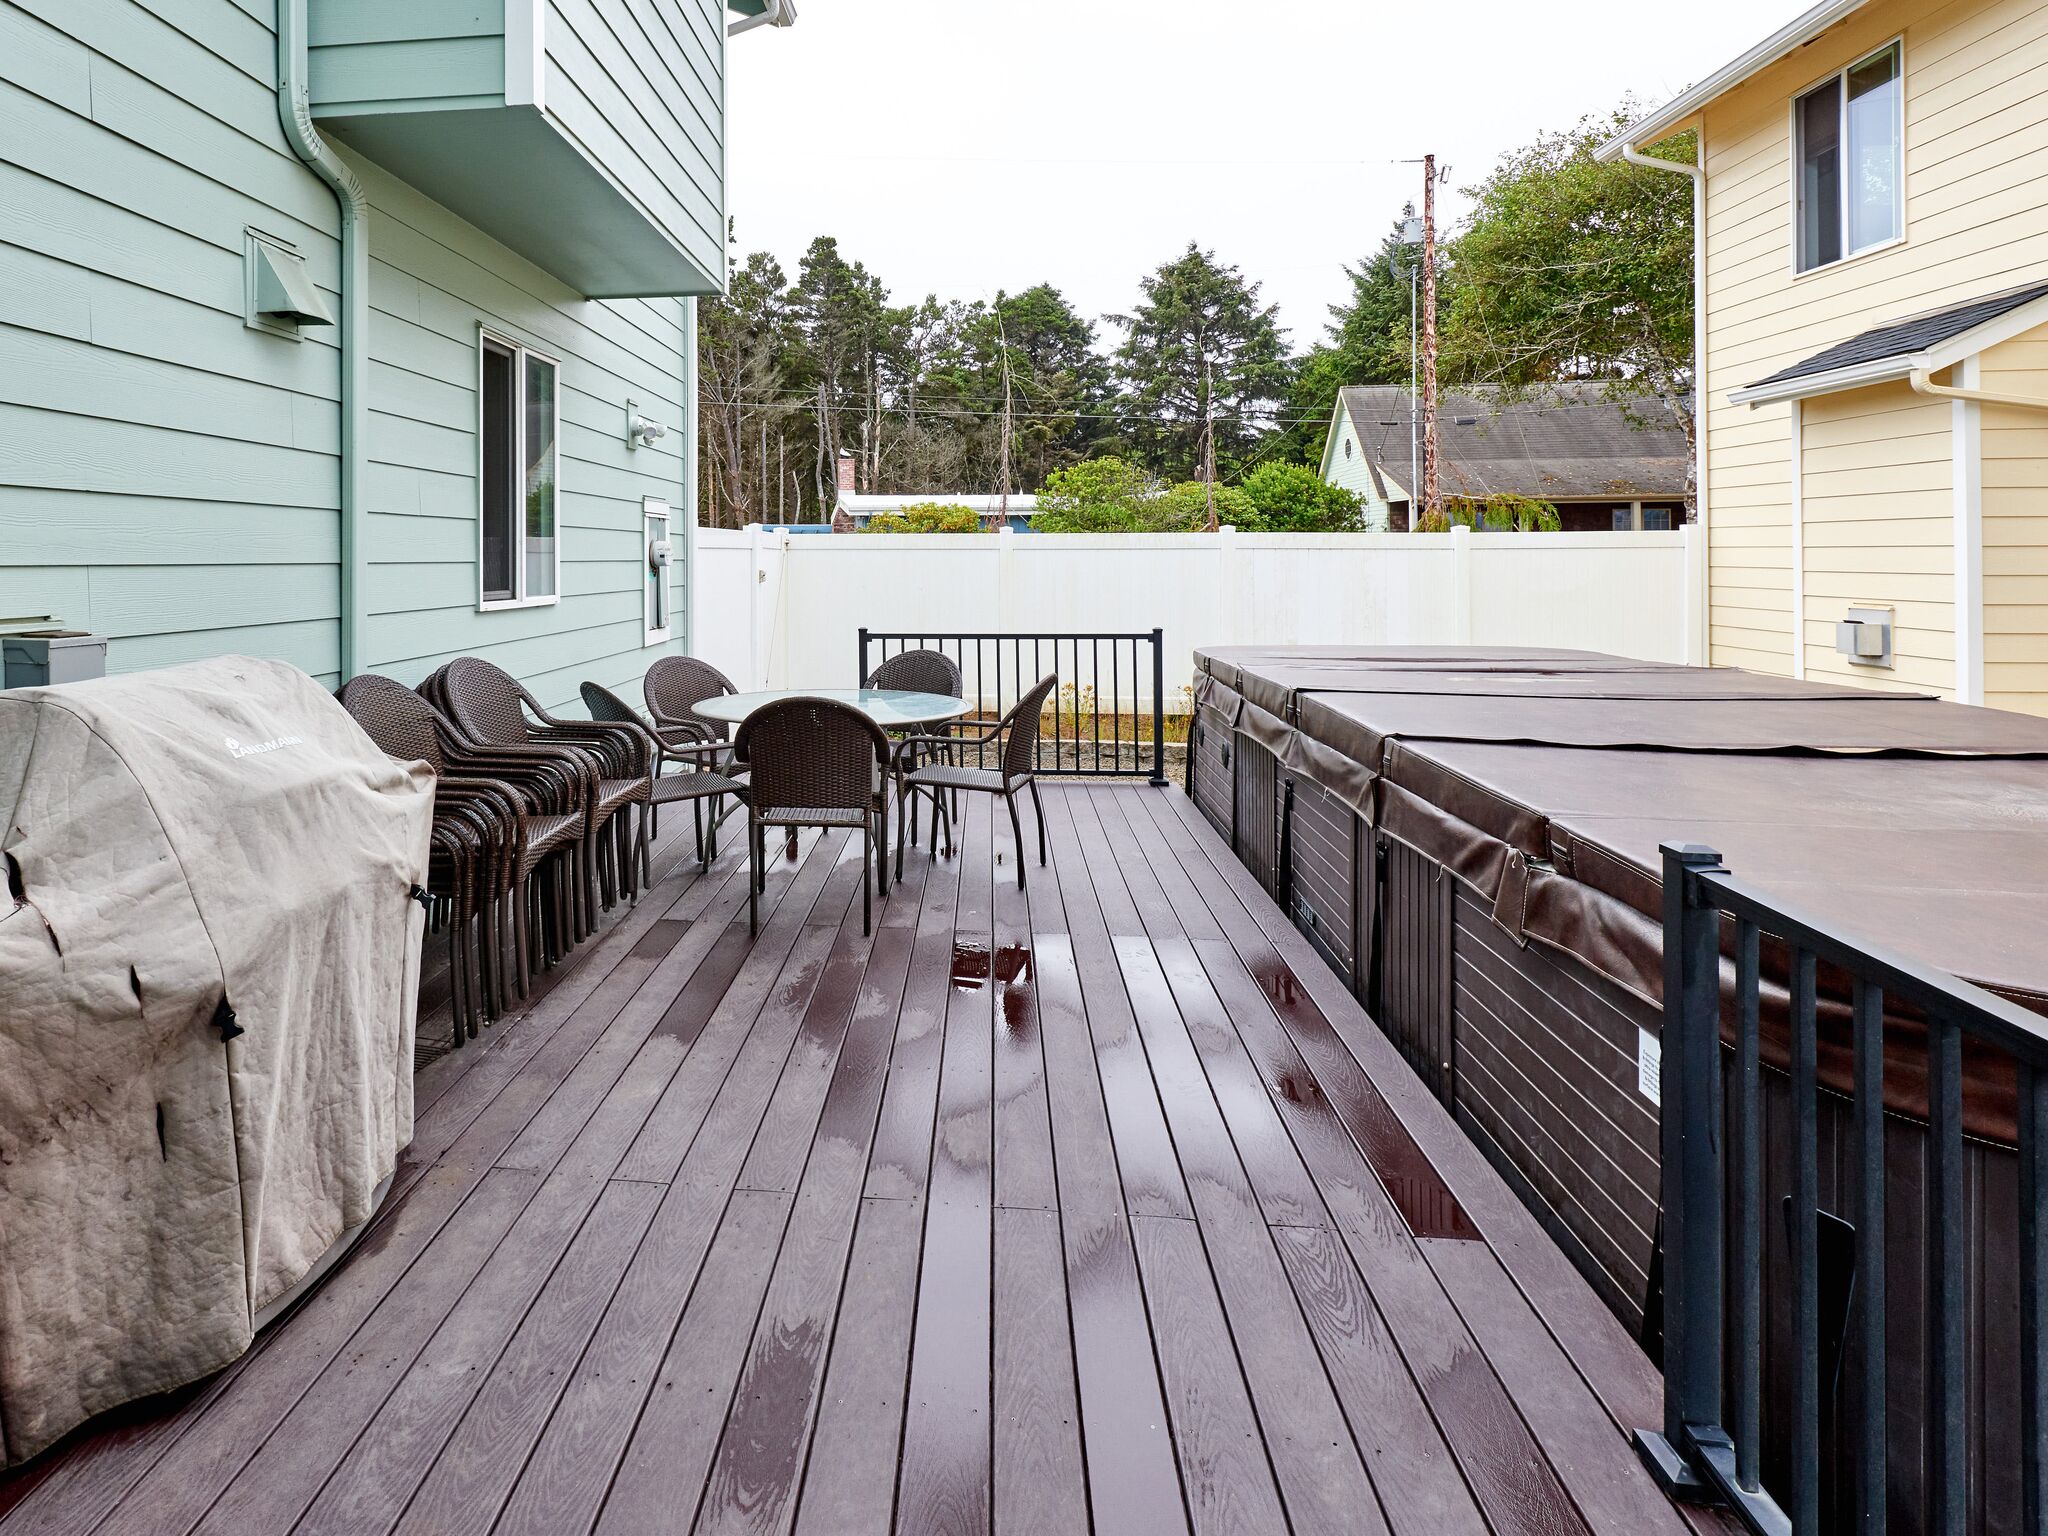 Vacation home patio deck with furniture and grill.